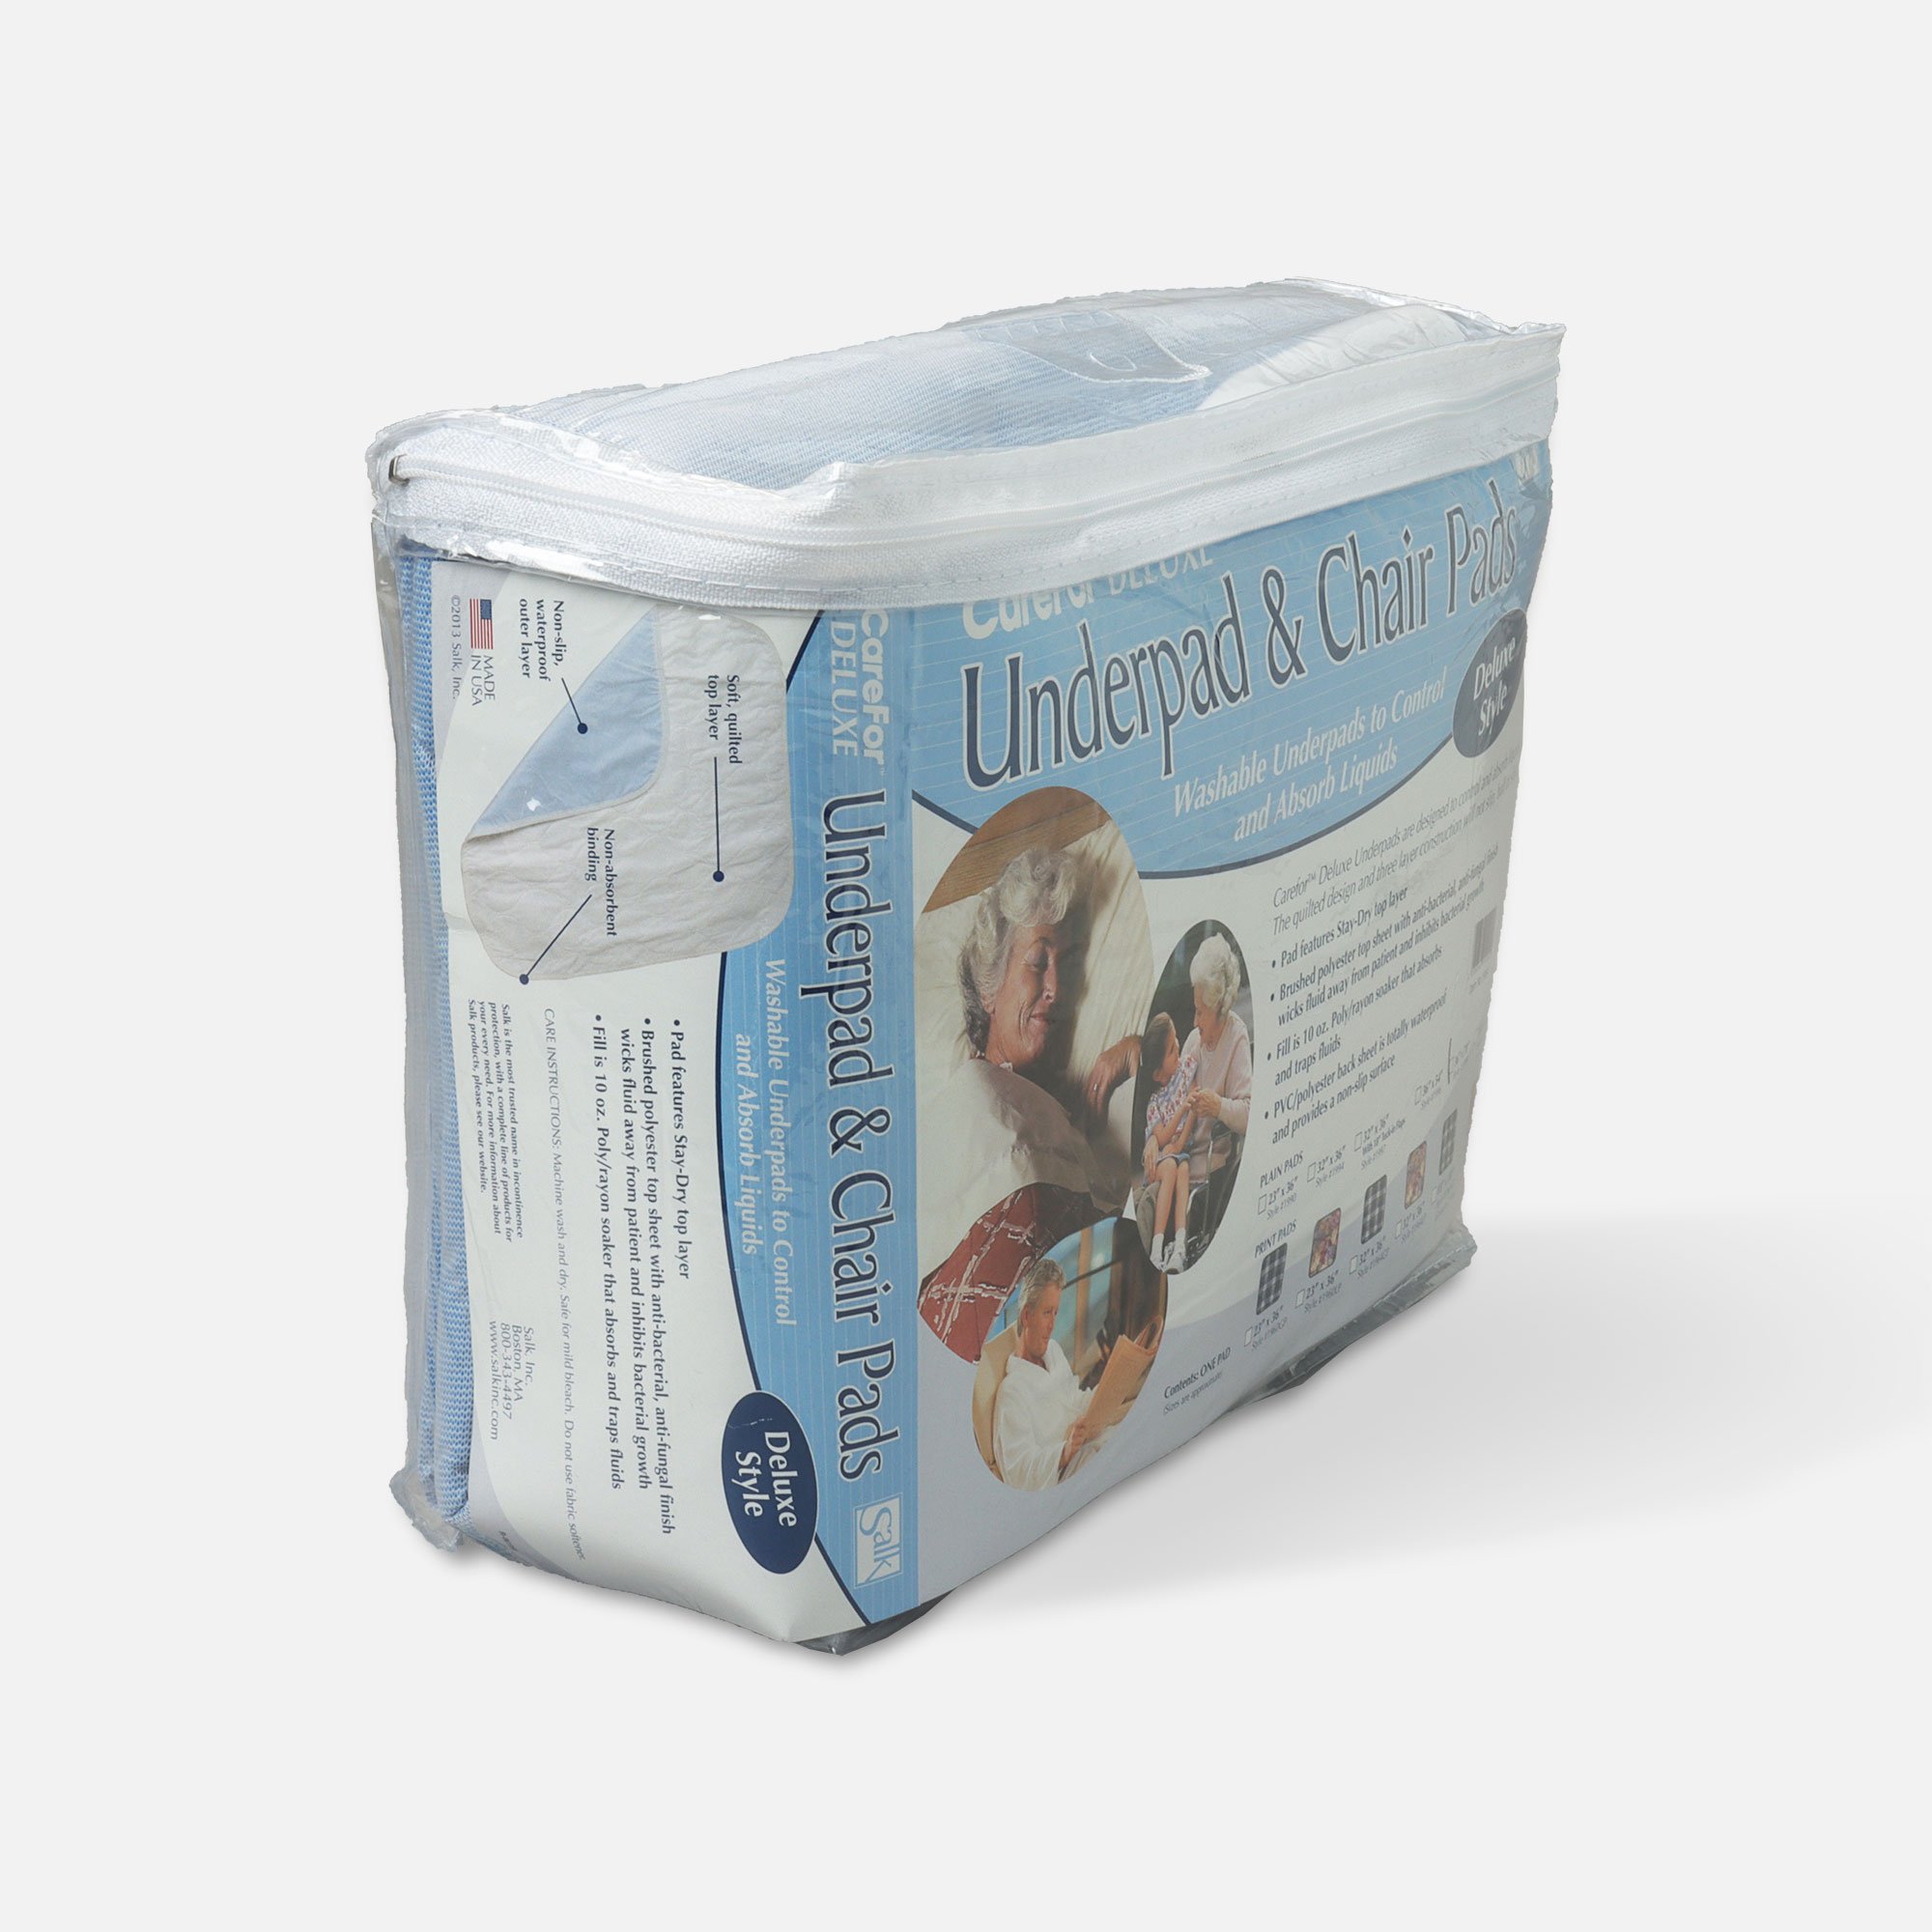 https://www.rehabmart.com/imagesfromrd/carefor-reusable-deluxe-underpads-quilted-36-x-72-inches-one-underpad-per-package-11463-2.jpg